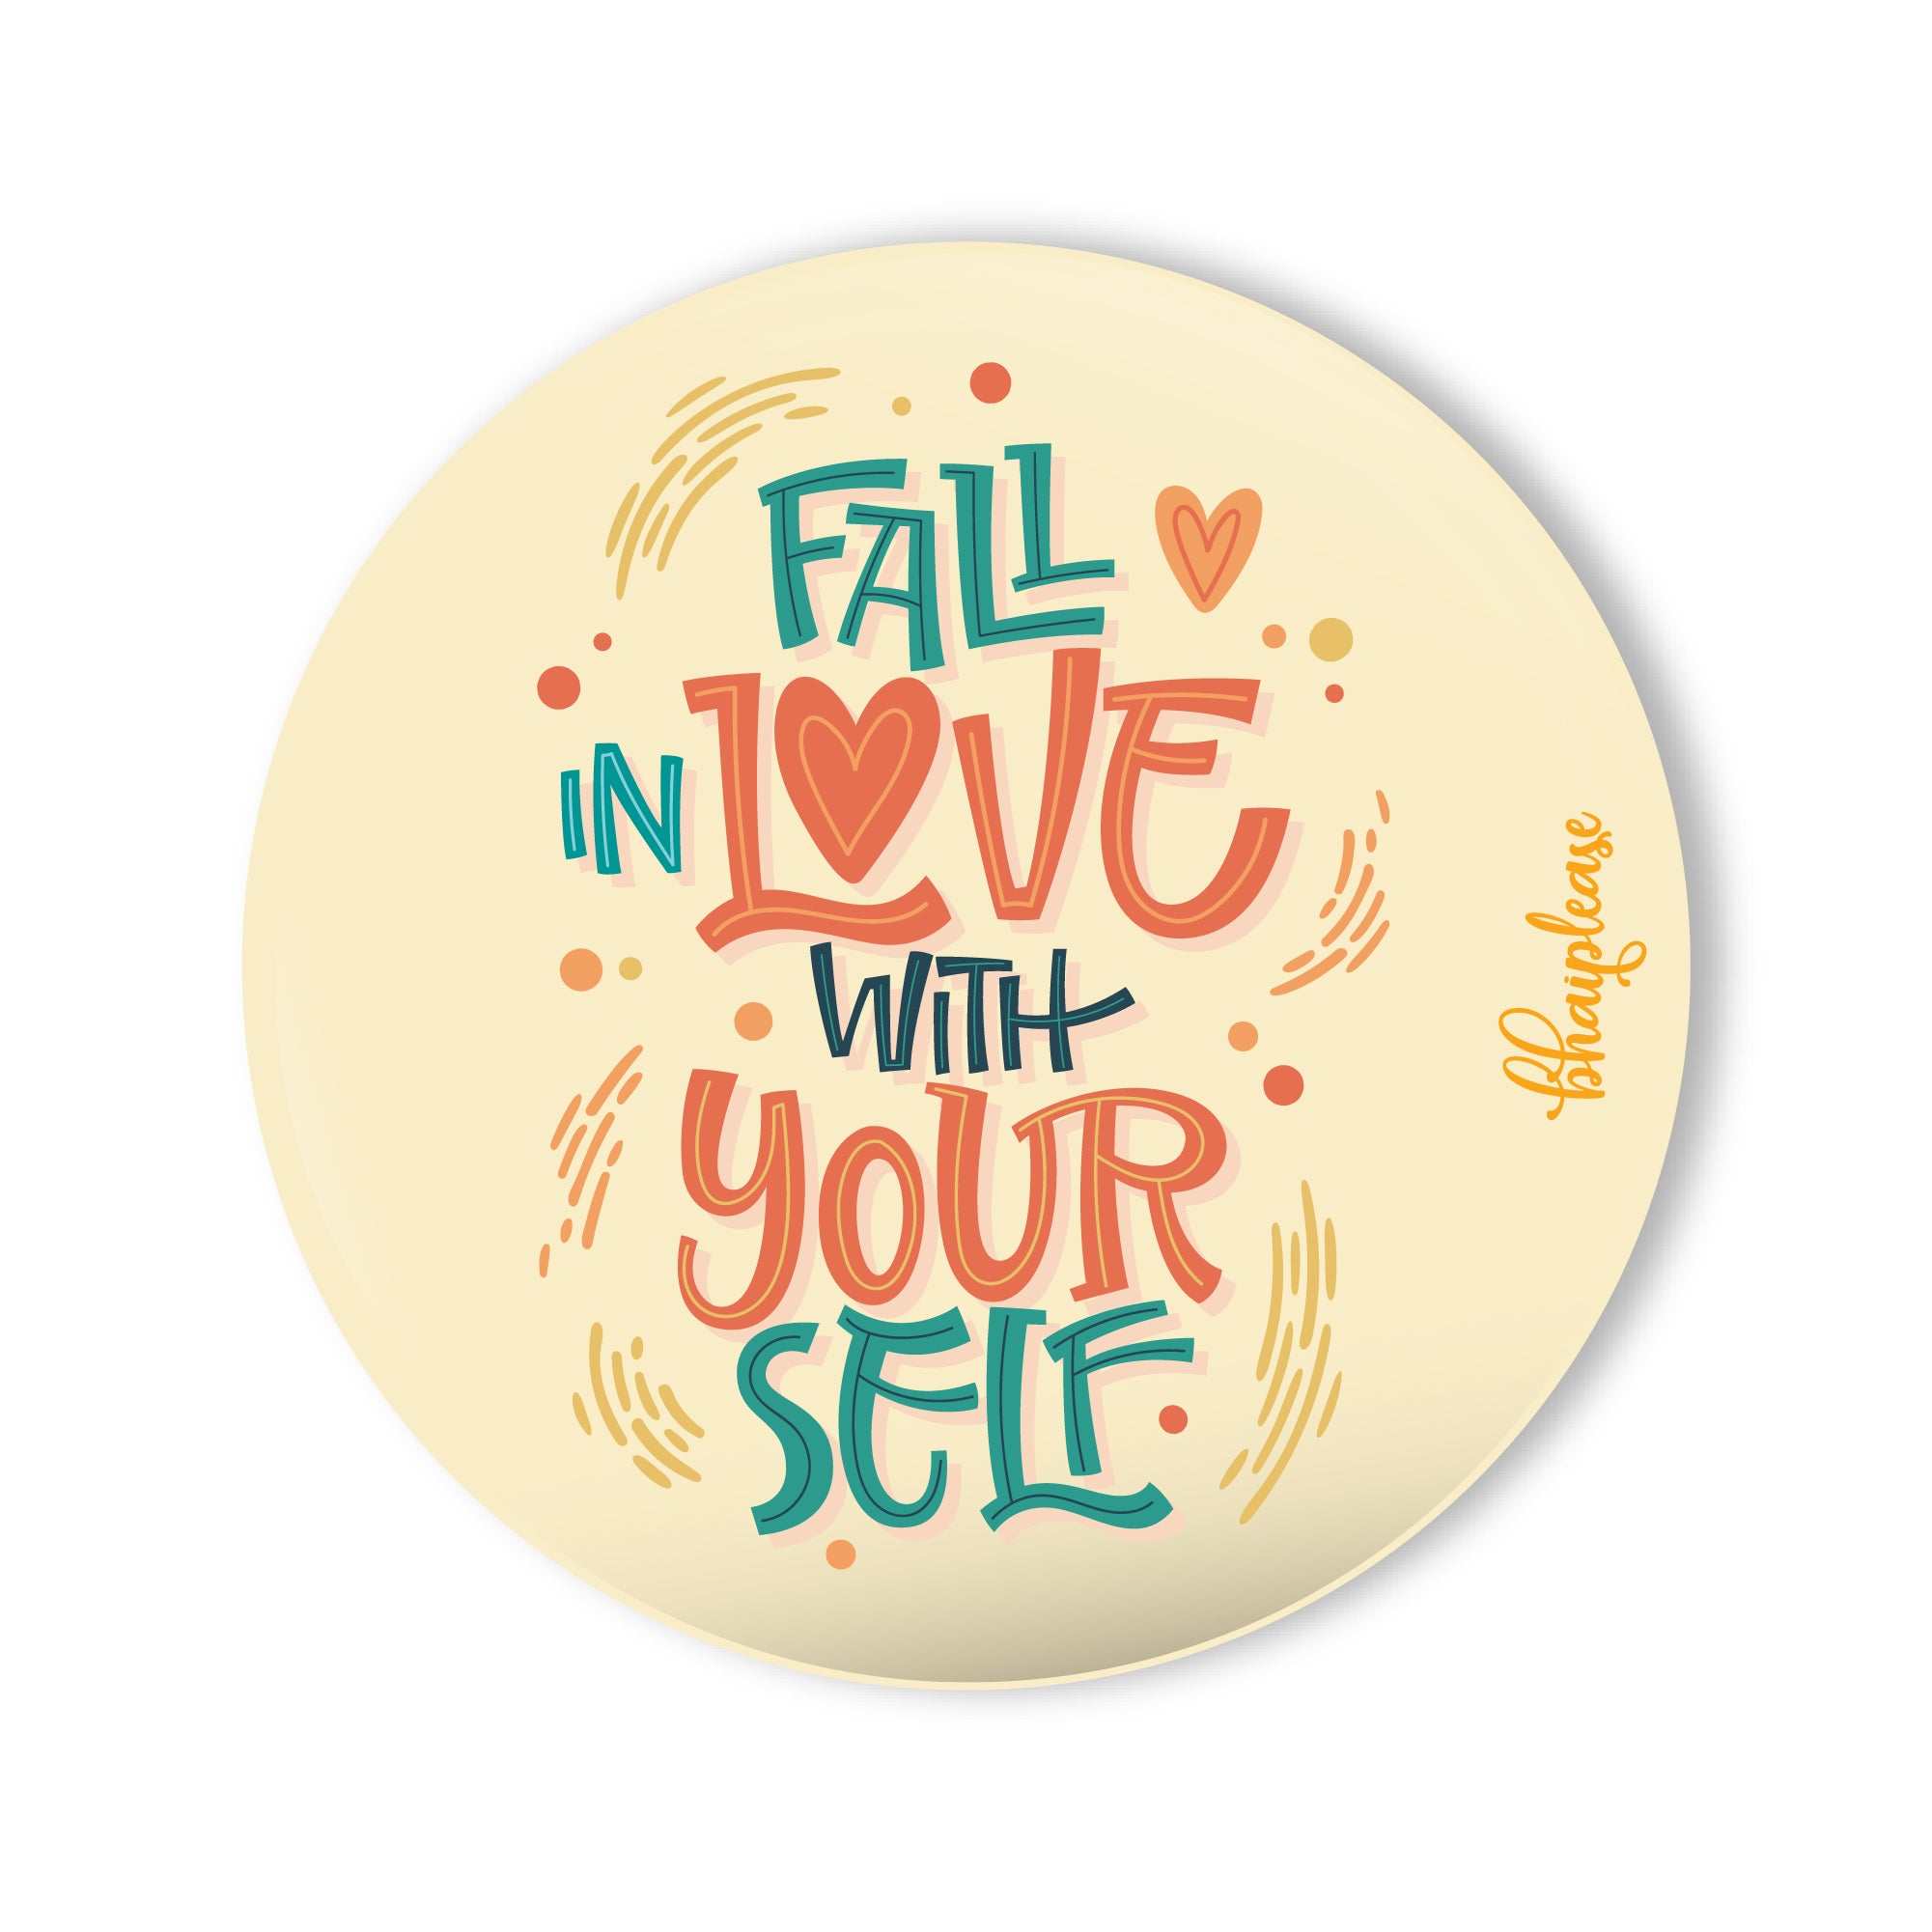 Fall in Love With Yourself Round Fridge Magnet